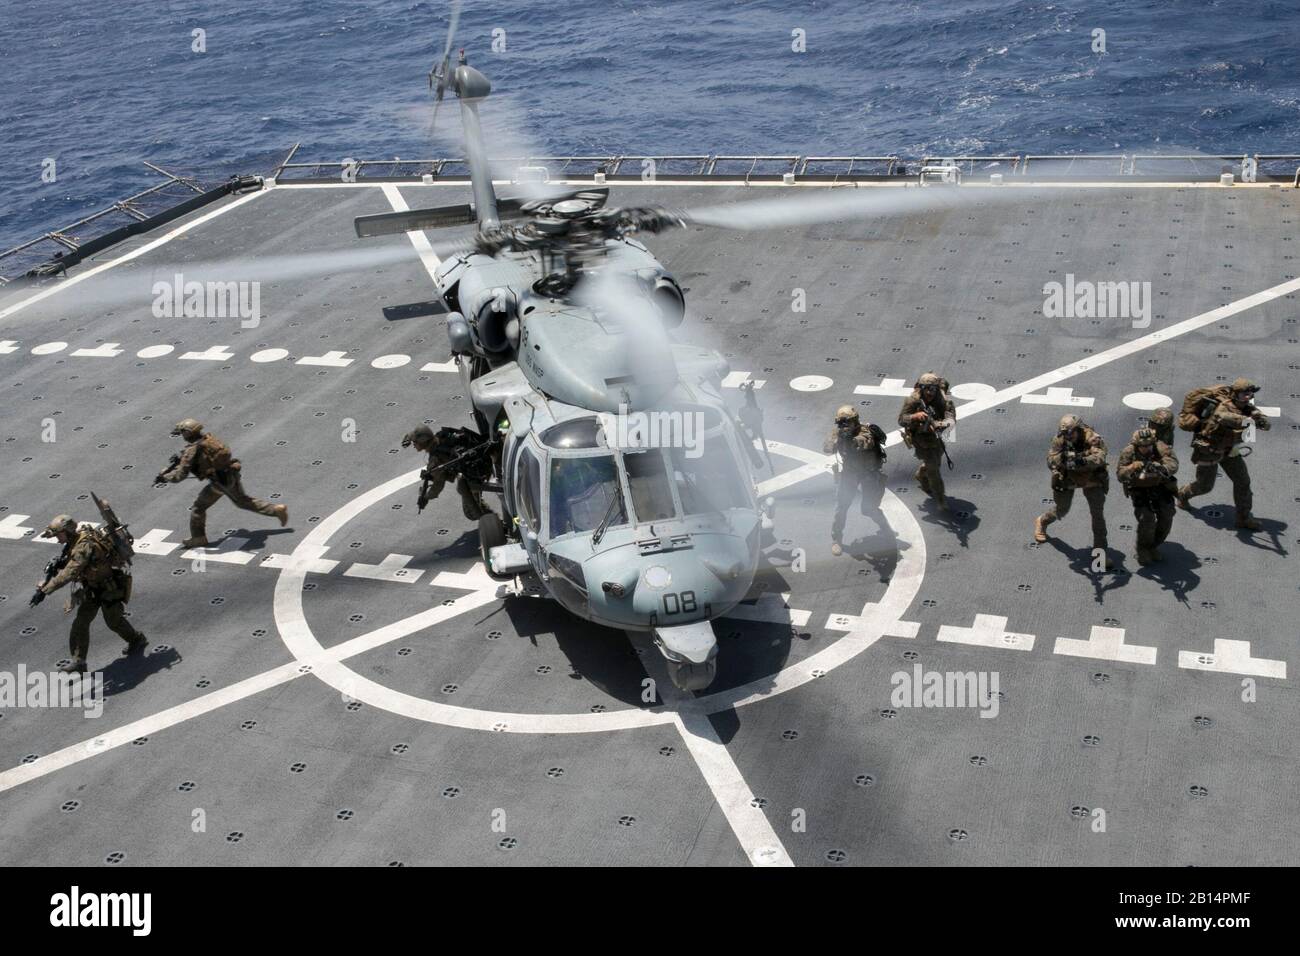 U.S. Marines with Maritime Raid Force, 31st Marine Expeditionary Unit, exit an SH-60 Sea Hawk helicopter during Visit, Board, Search, and Seizure training during Certification Exercise aboard the USNS Richard E. Byrd (T-AKE 4), while underway in the Pacific Ocean April 20, 2018. The 31st MEU and Amphibious Squadron 11 conducted CERTEX as the final evaluation in a series of training exercises which ensured readiness for crisis response throughout the Indo-Pacific region. (U.S. Marine Corps photo by Lance Cpl. Amy Phan) Stock Photo